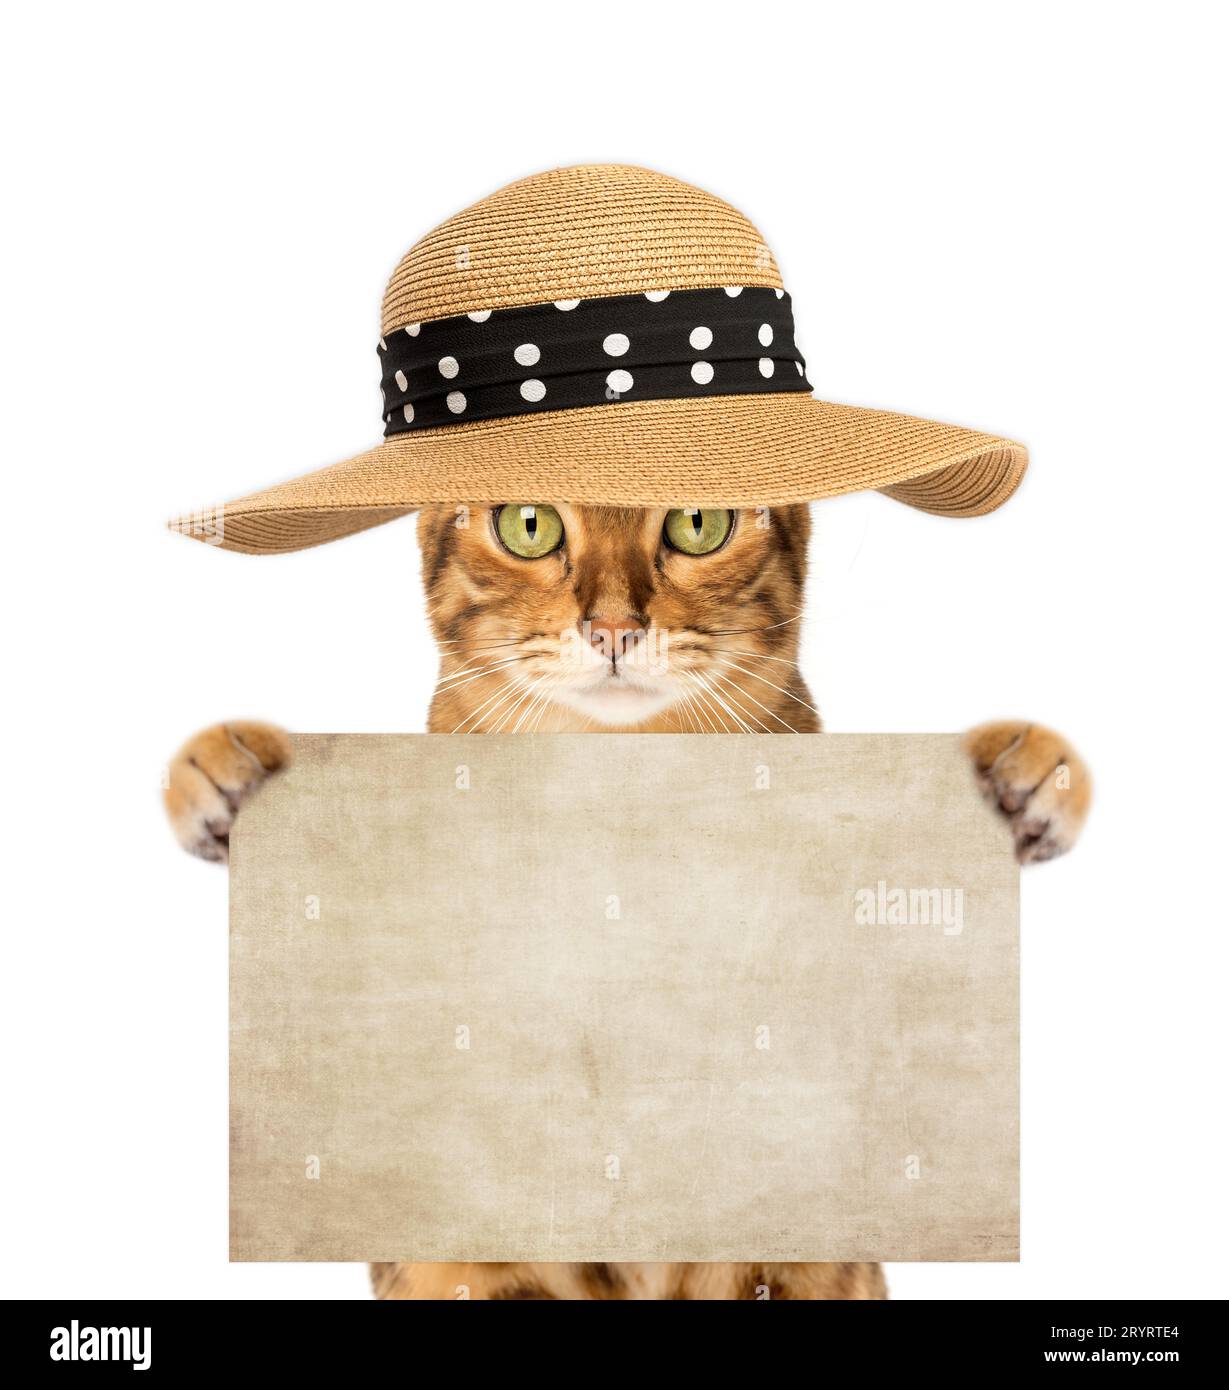 https://c8.alamy.com/comp/2RYRTE4/funny-cat-in-a-straw-hat-with-an-empty-sheet-in-its-paws-2RYRTE4.jpg